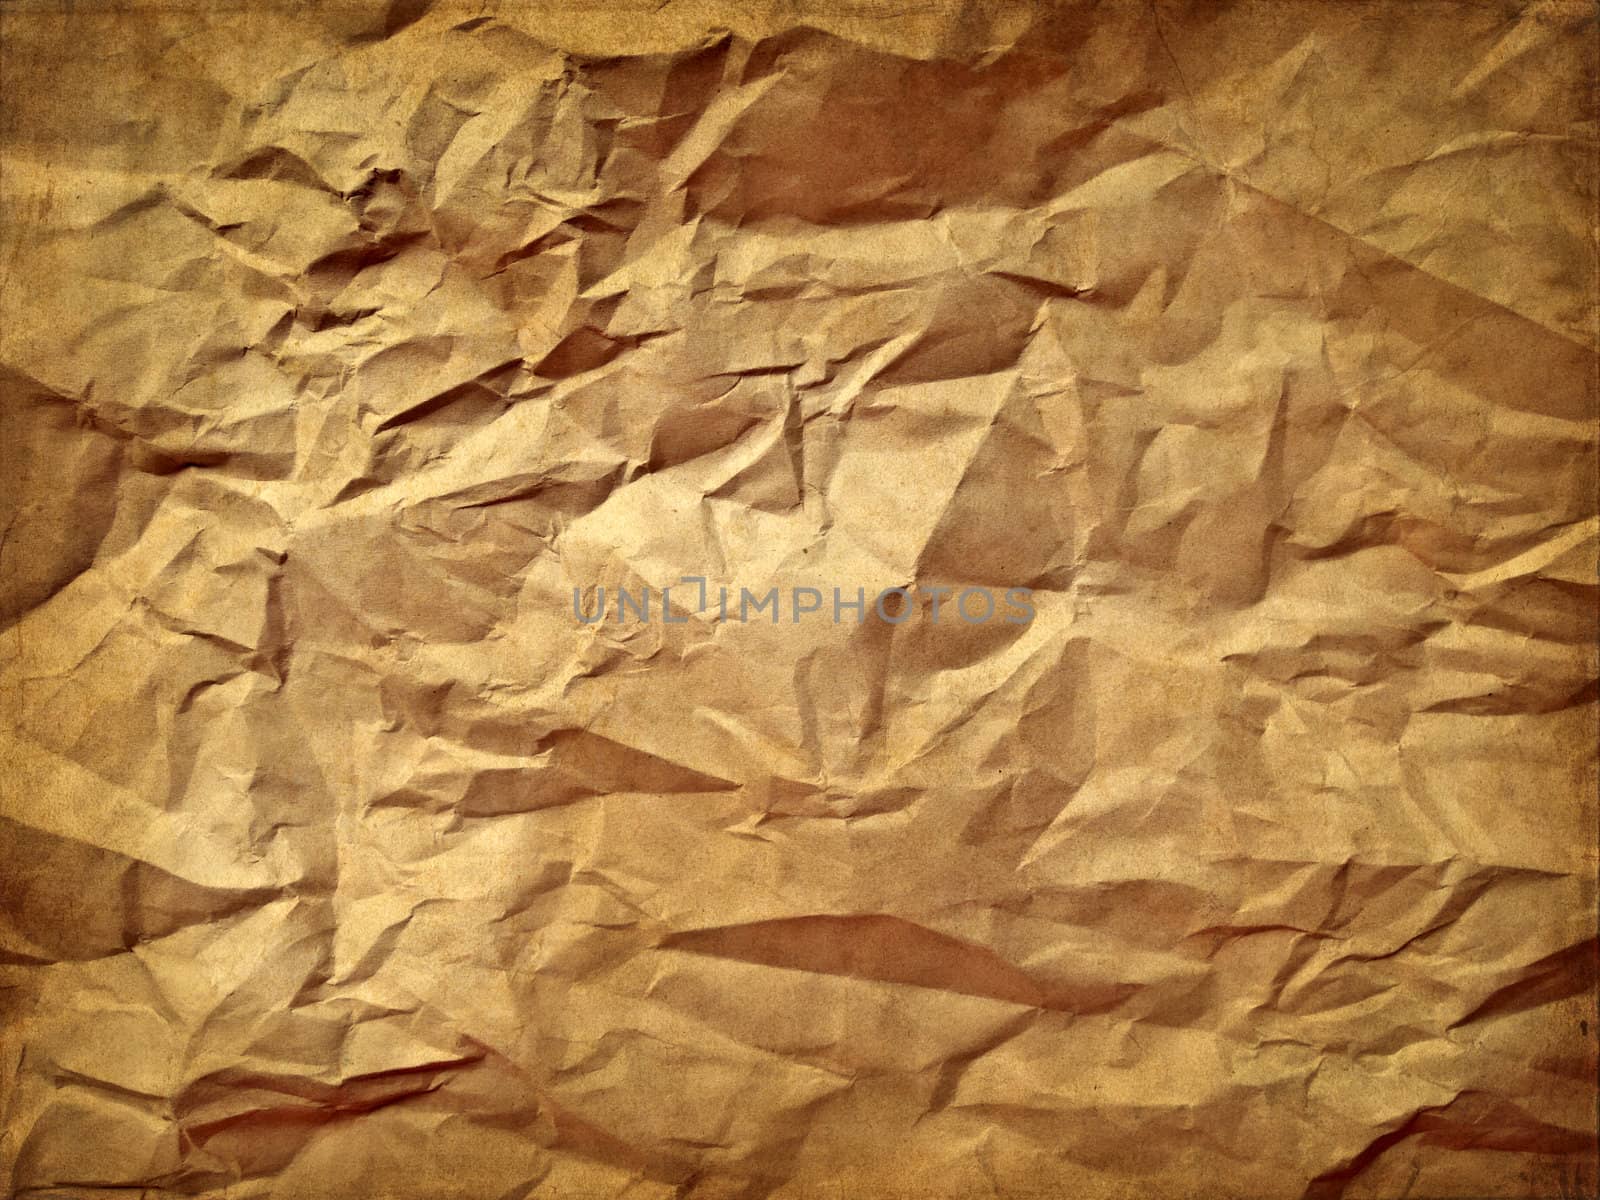 Crumpled paper texture by MalyDesigner